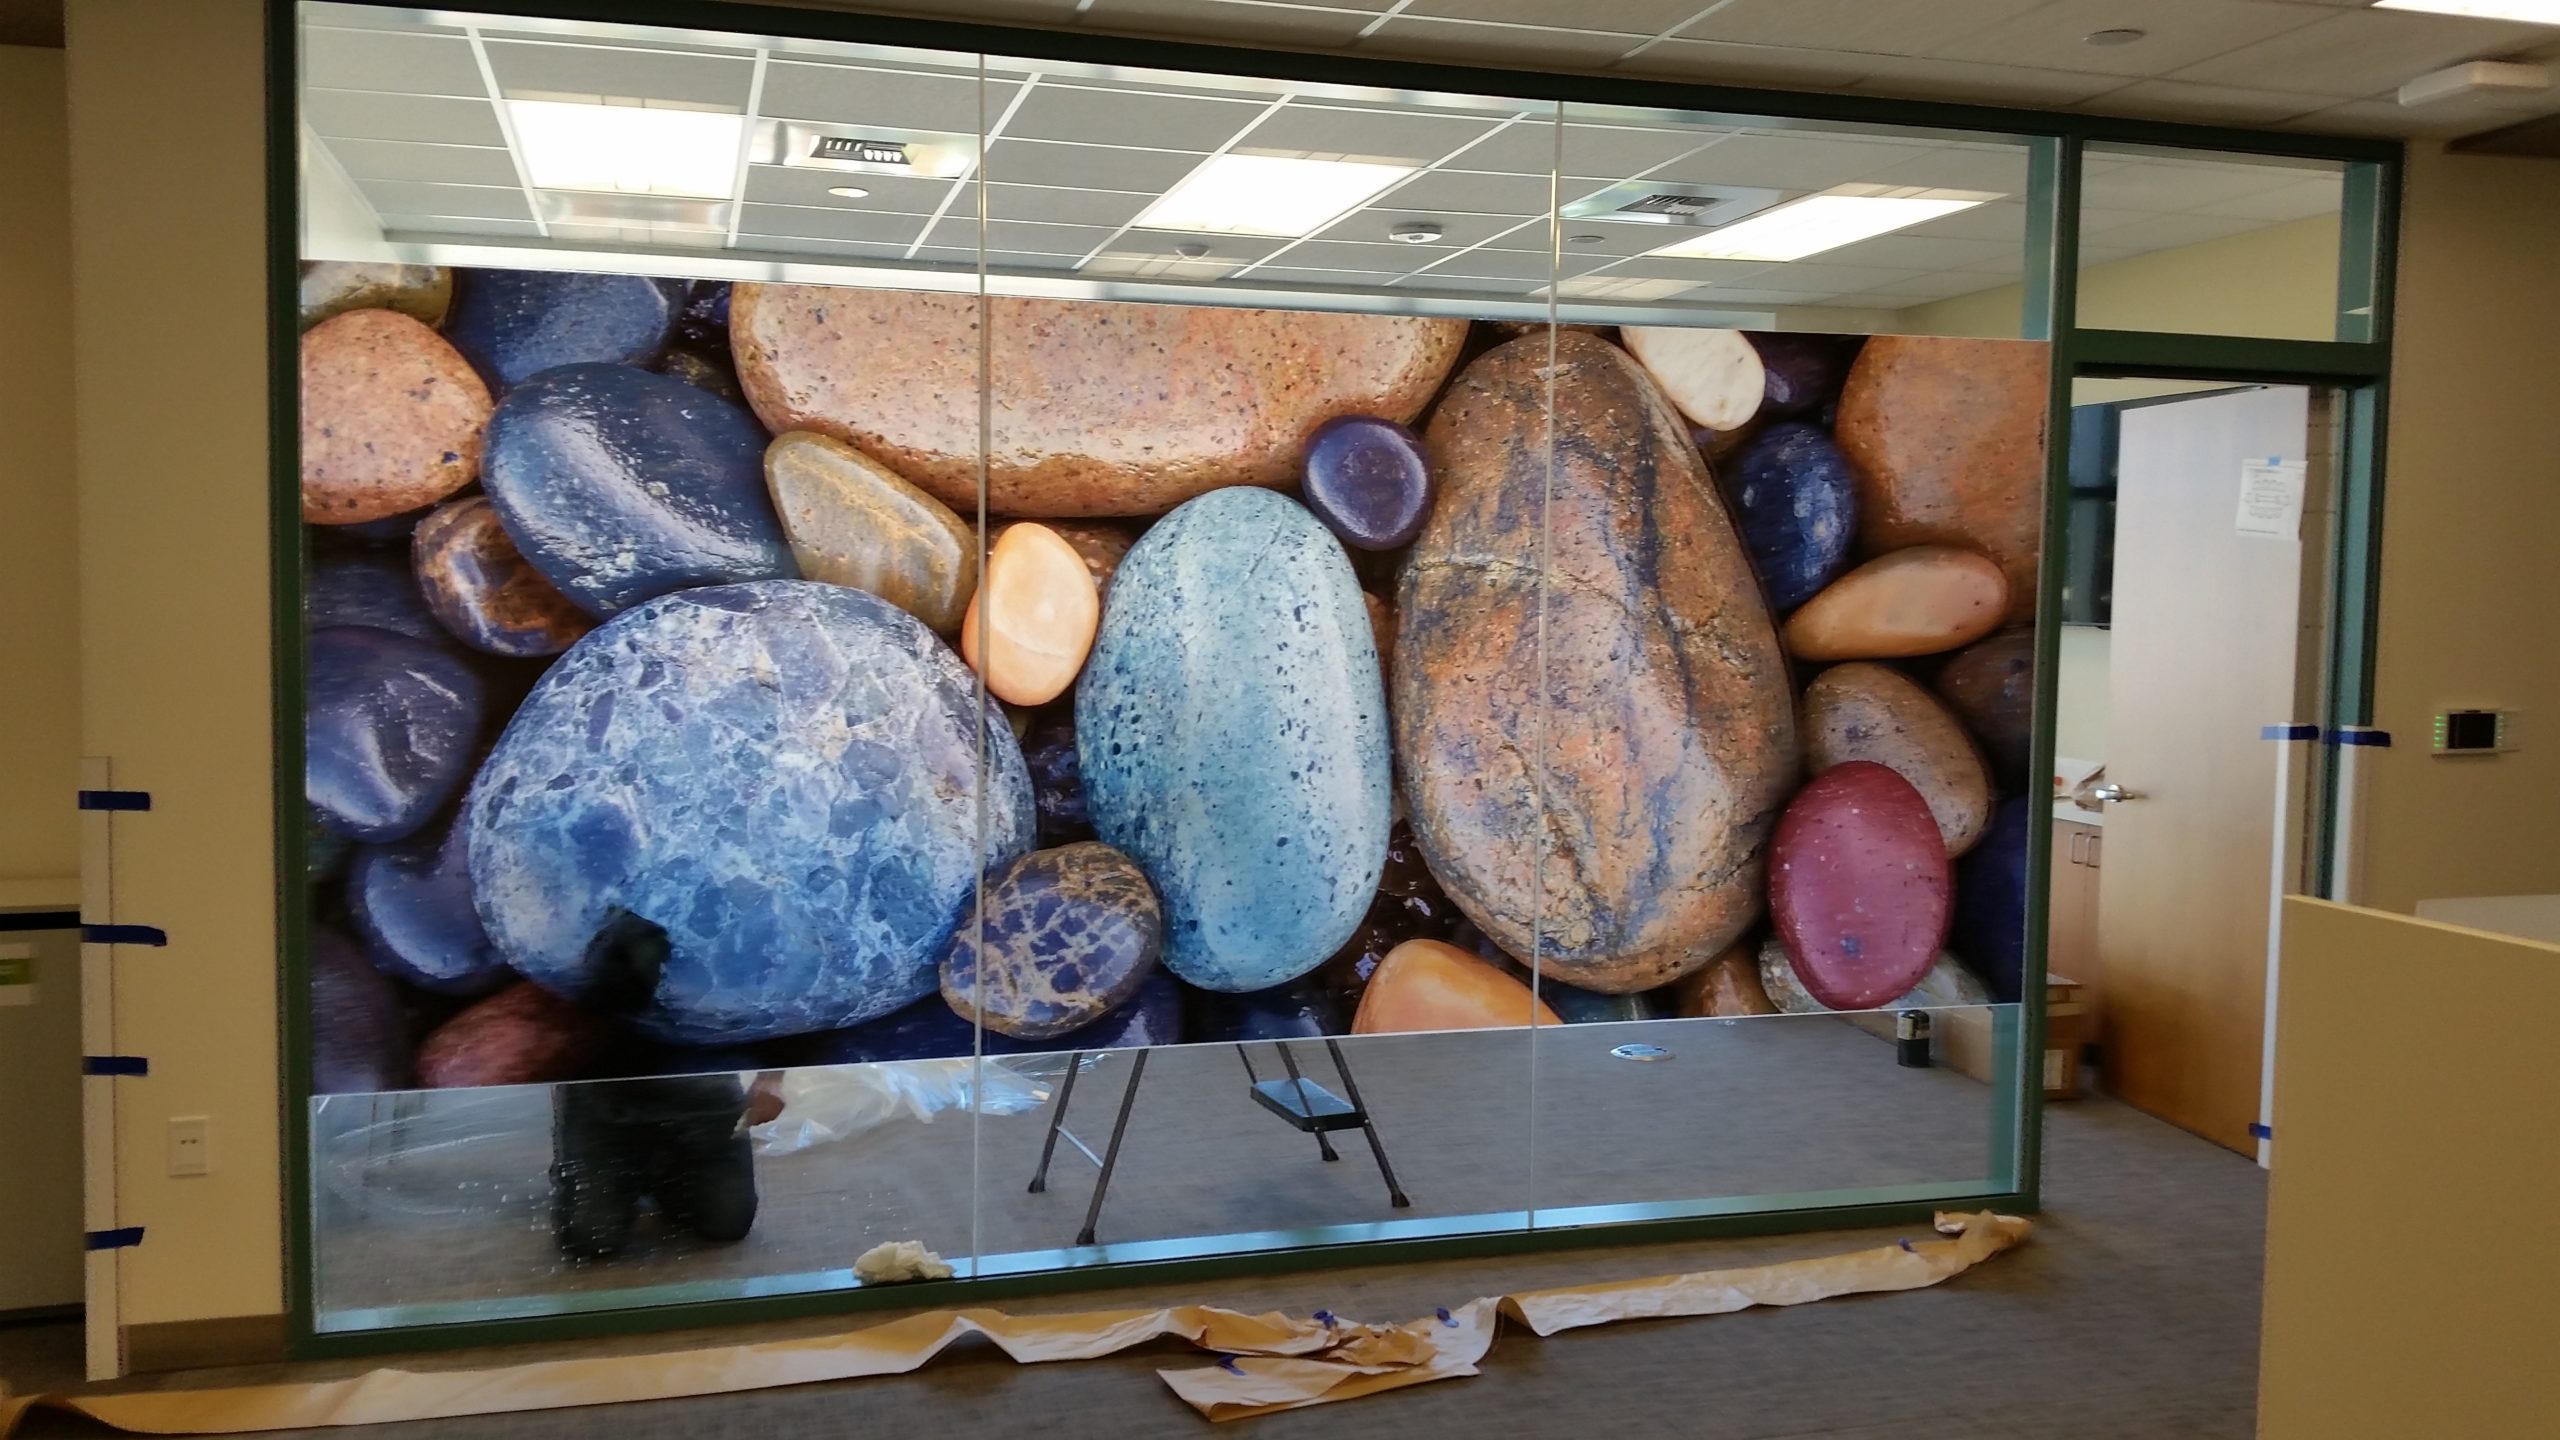 Translucent Window cling close-up of wet river rocks being installed on interior office window for Rady Childrens image from Henry Domke